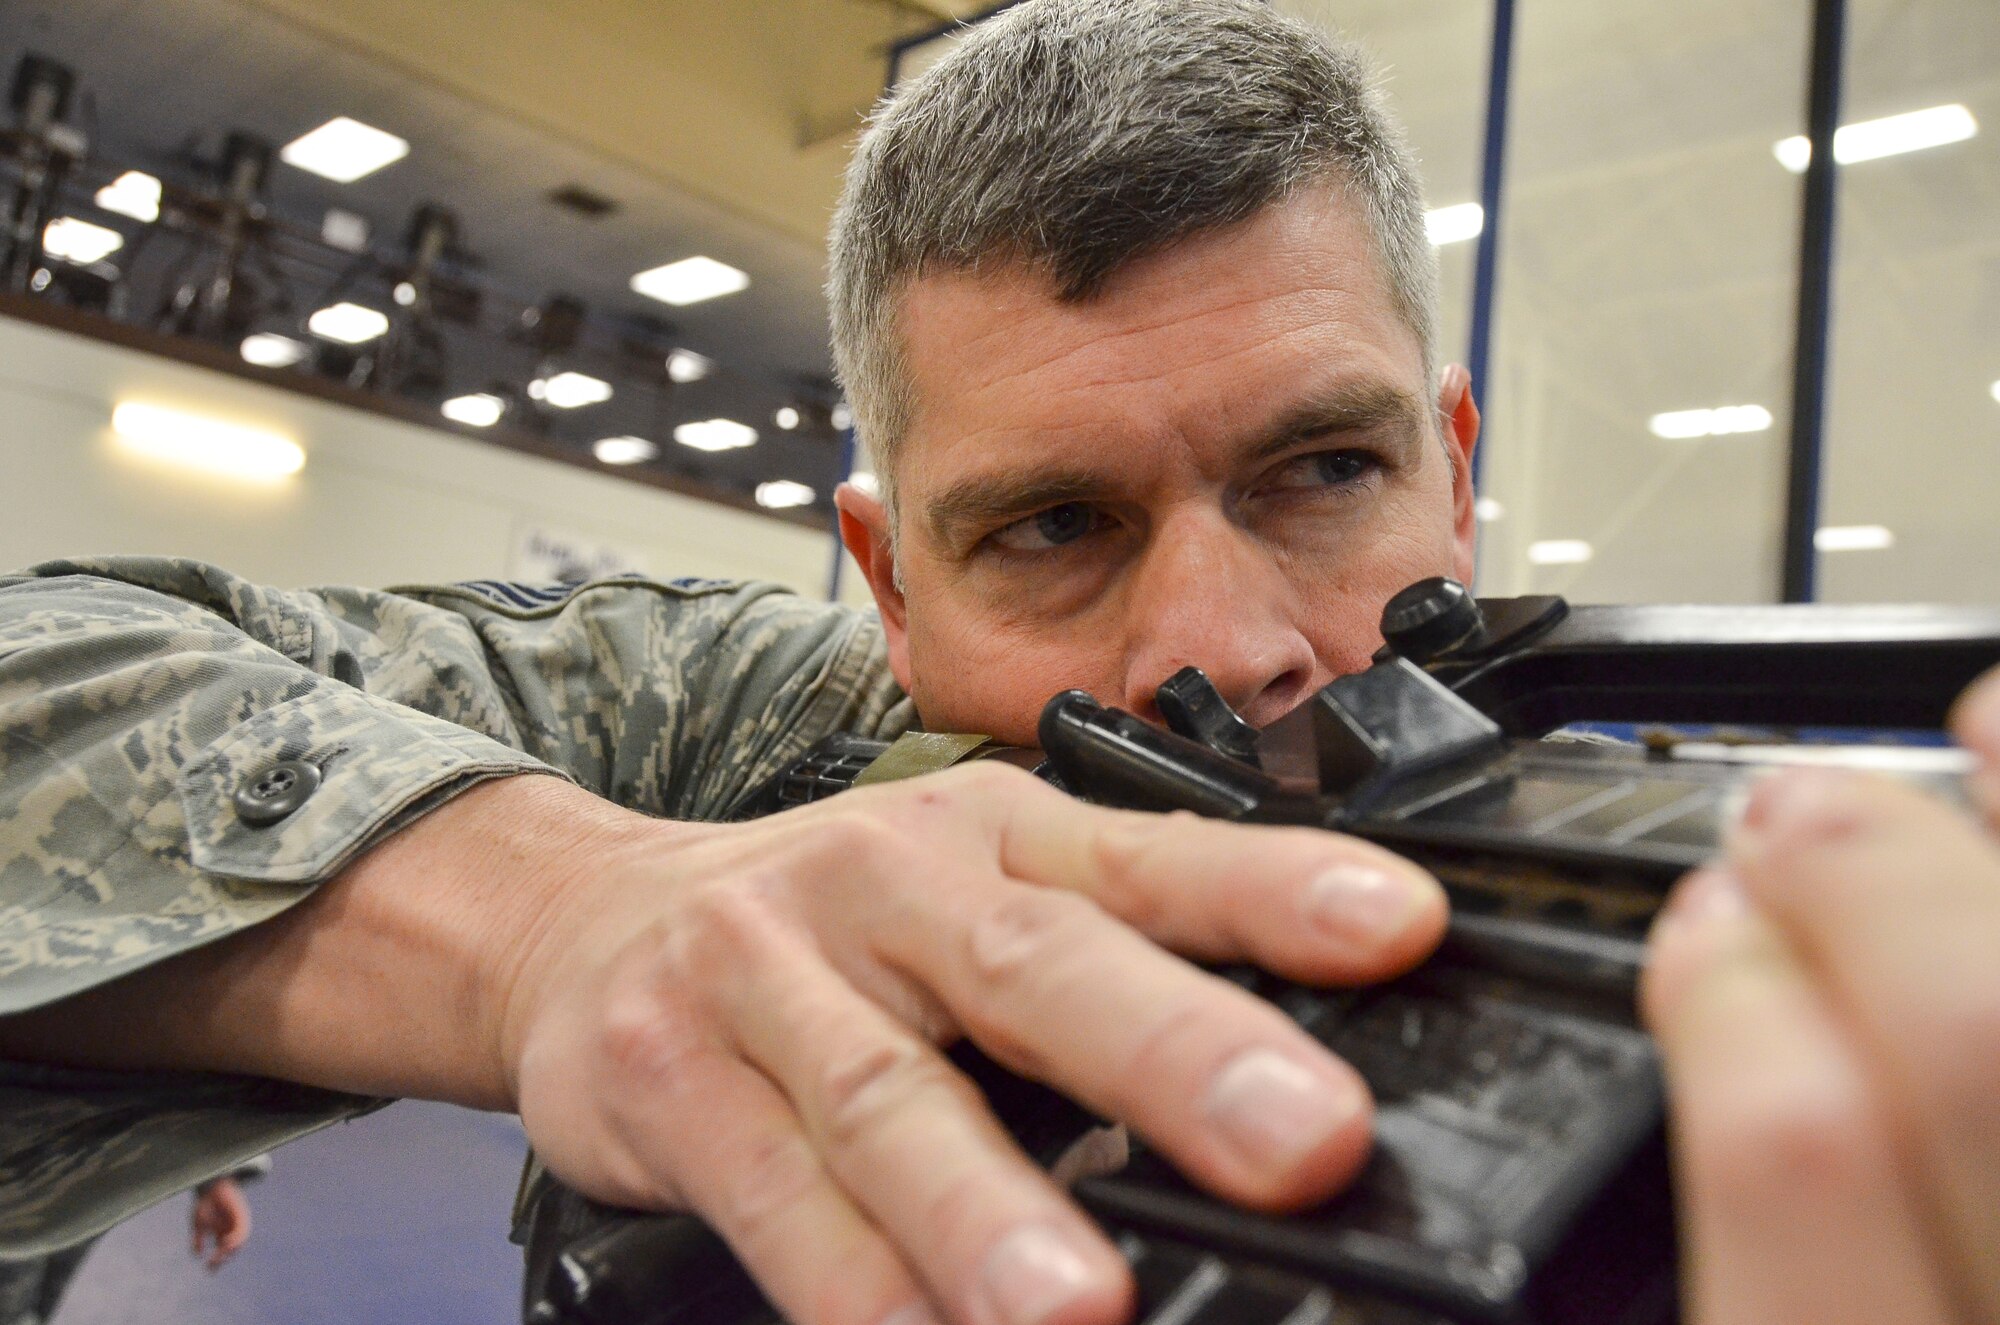 Senior Master Sgt. Kevin Wendt, 612th Support Squadron, practices looking down the sight of his weapon before going through the room clearing portion of the Modern Army Combatives Program (MACP) Basic Combatives Course Level 1 at Davis-Monthan Air Force Base, Ariz., Jan. 16, 2014.The 40- hour course focuses on the three phases of basic fighting strategy; close the distance, gain the dominate position, and how to finish the fight. (U.S. Air Force photo by Staff Sgt. Adam Grant/Released)